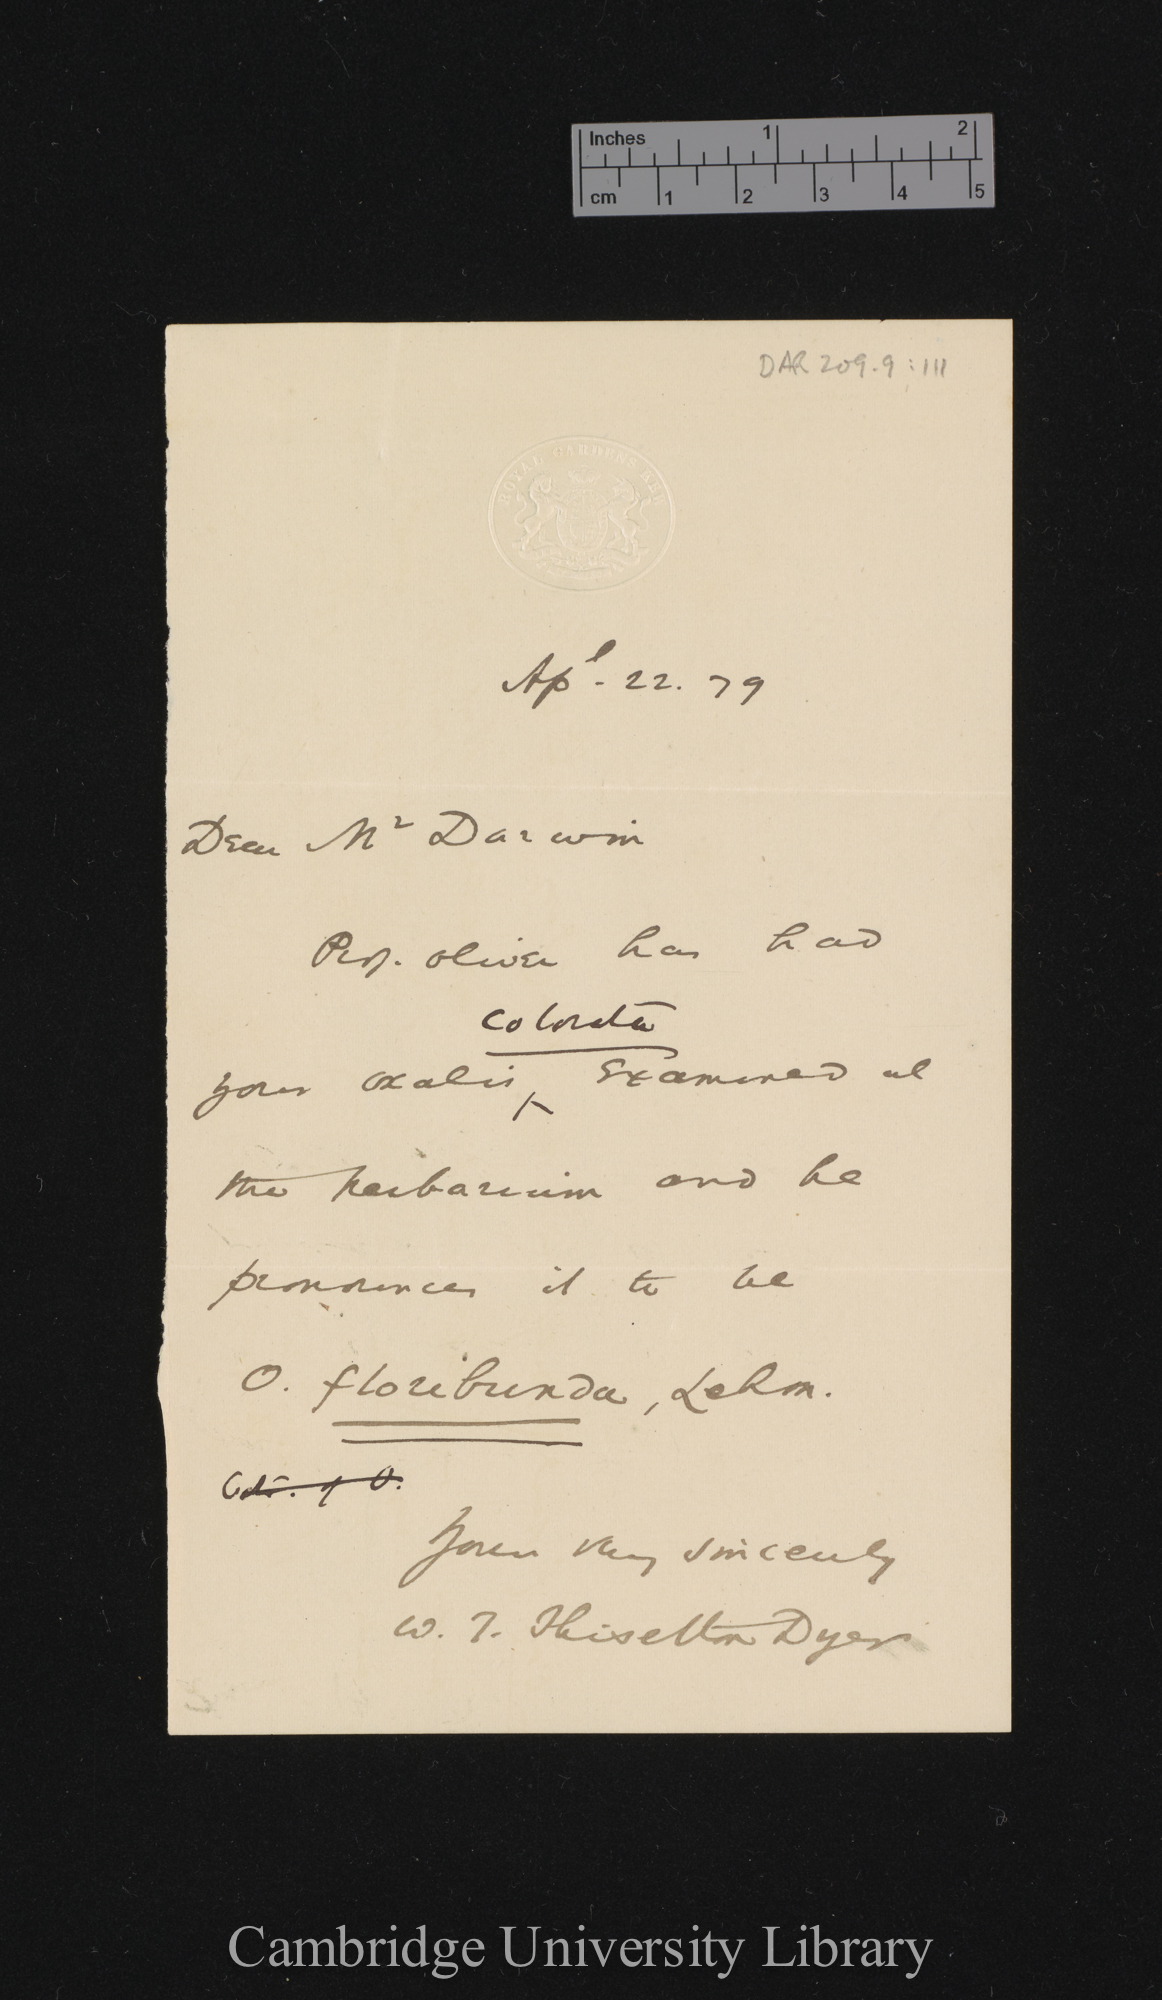 Letter from Sir William Turner Thiselton-Dyer to Charles Robert Darwin; written at Kew